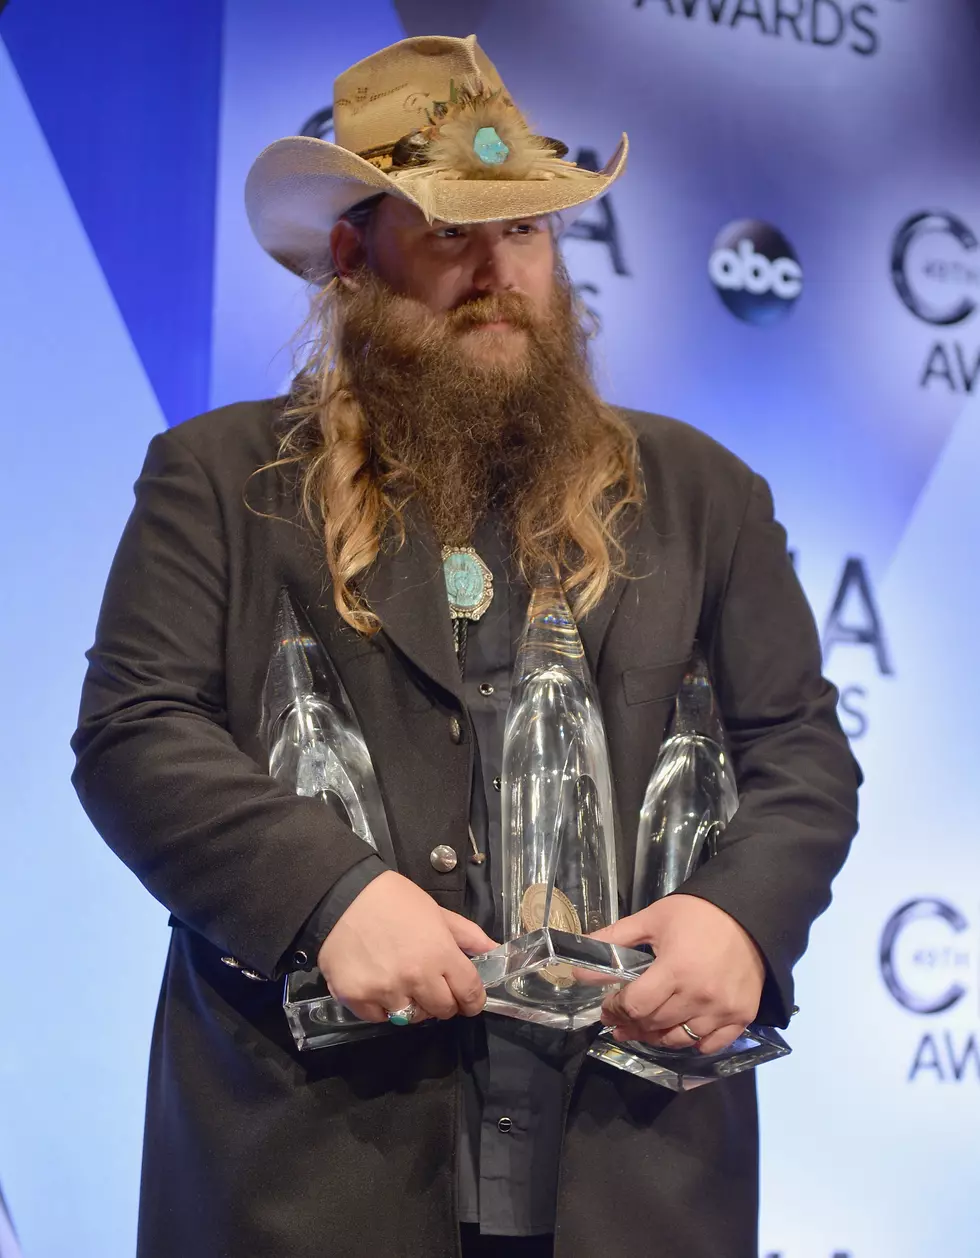 Chris Stapleton Hits Number One After CMA Awards